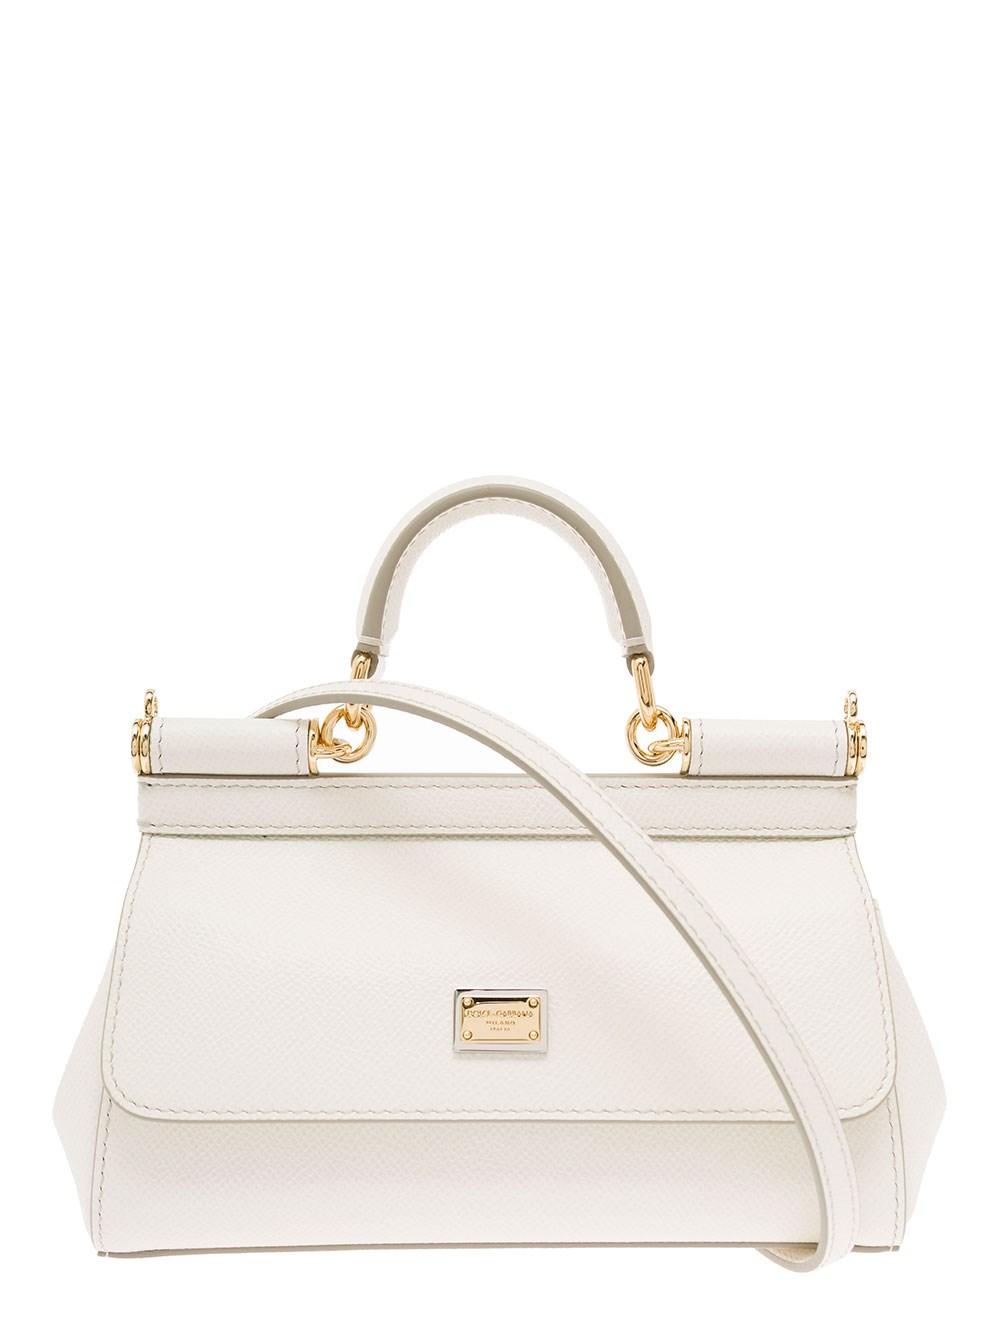 Dolce & Gabbana Small Leather Sicily Bag